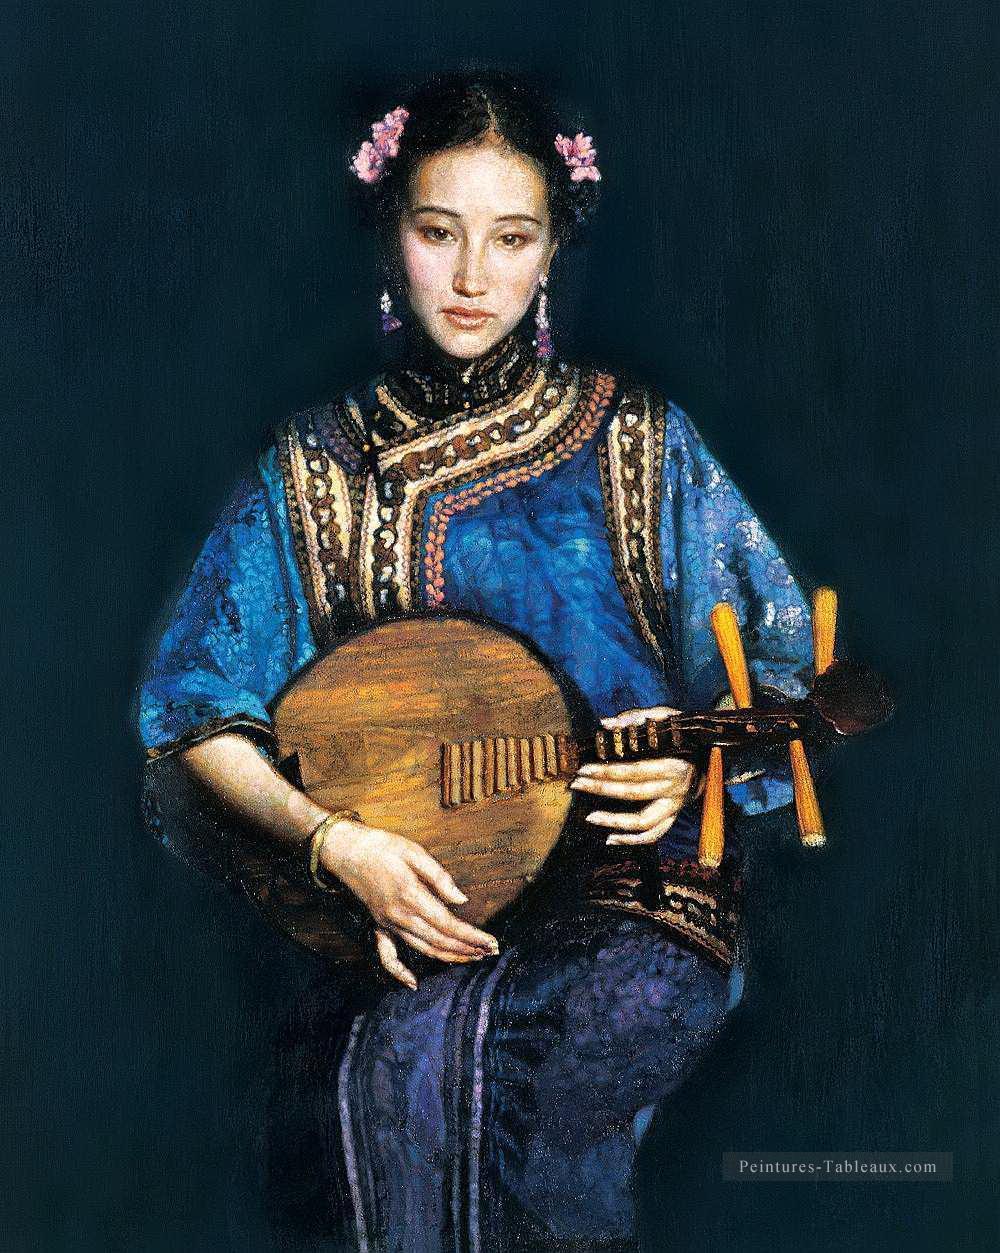 zg053cD118 Chinese painter Chen Yifei Girl Peintures à l'huile